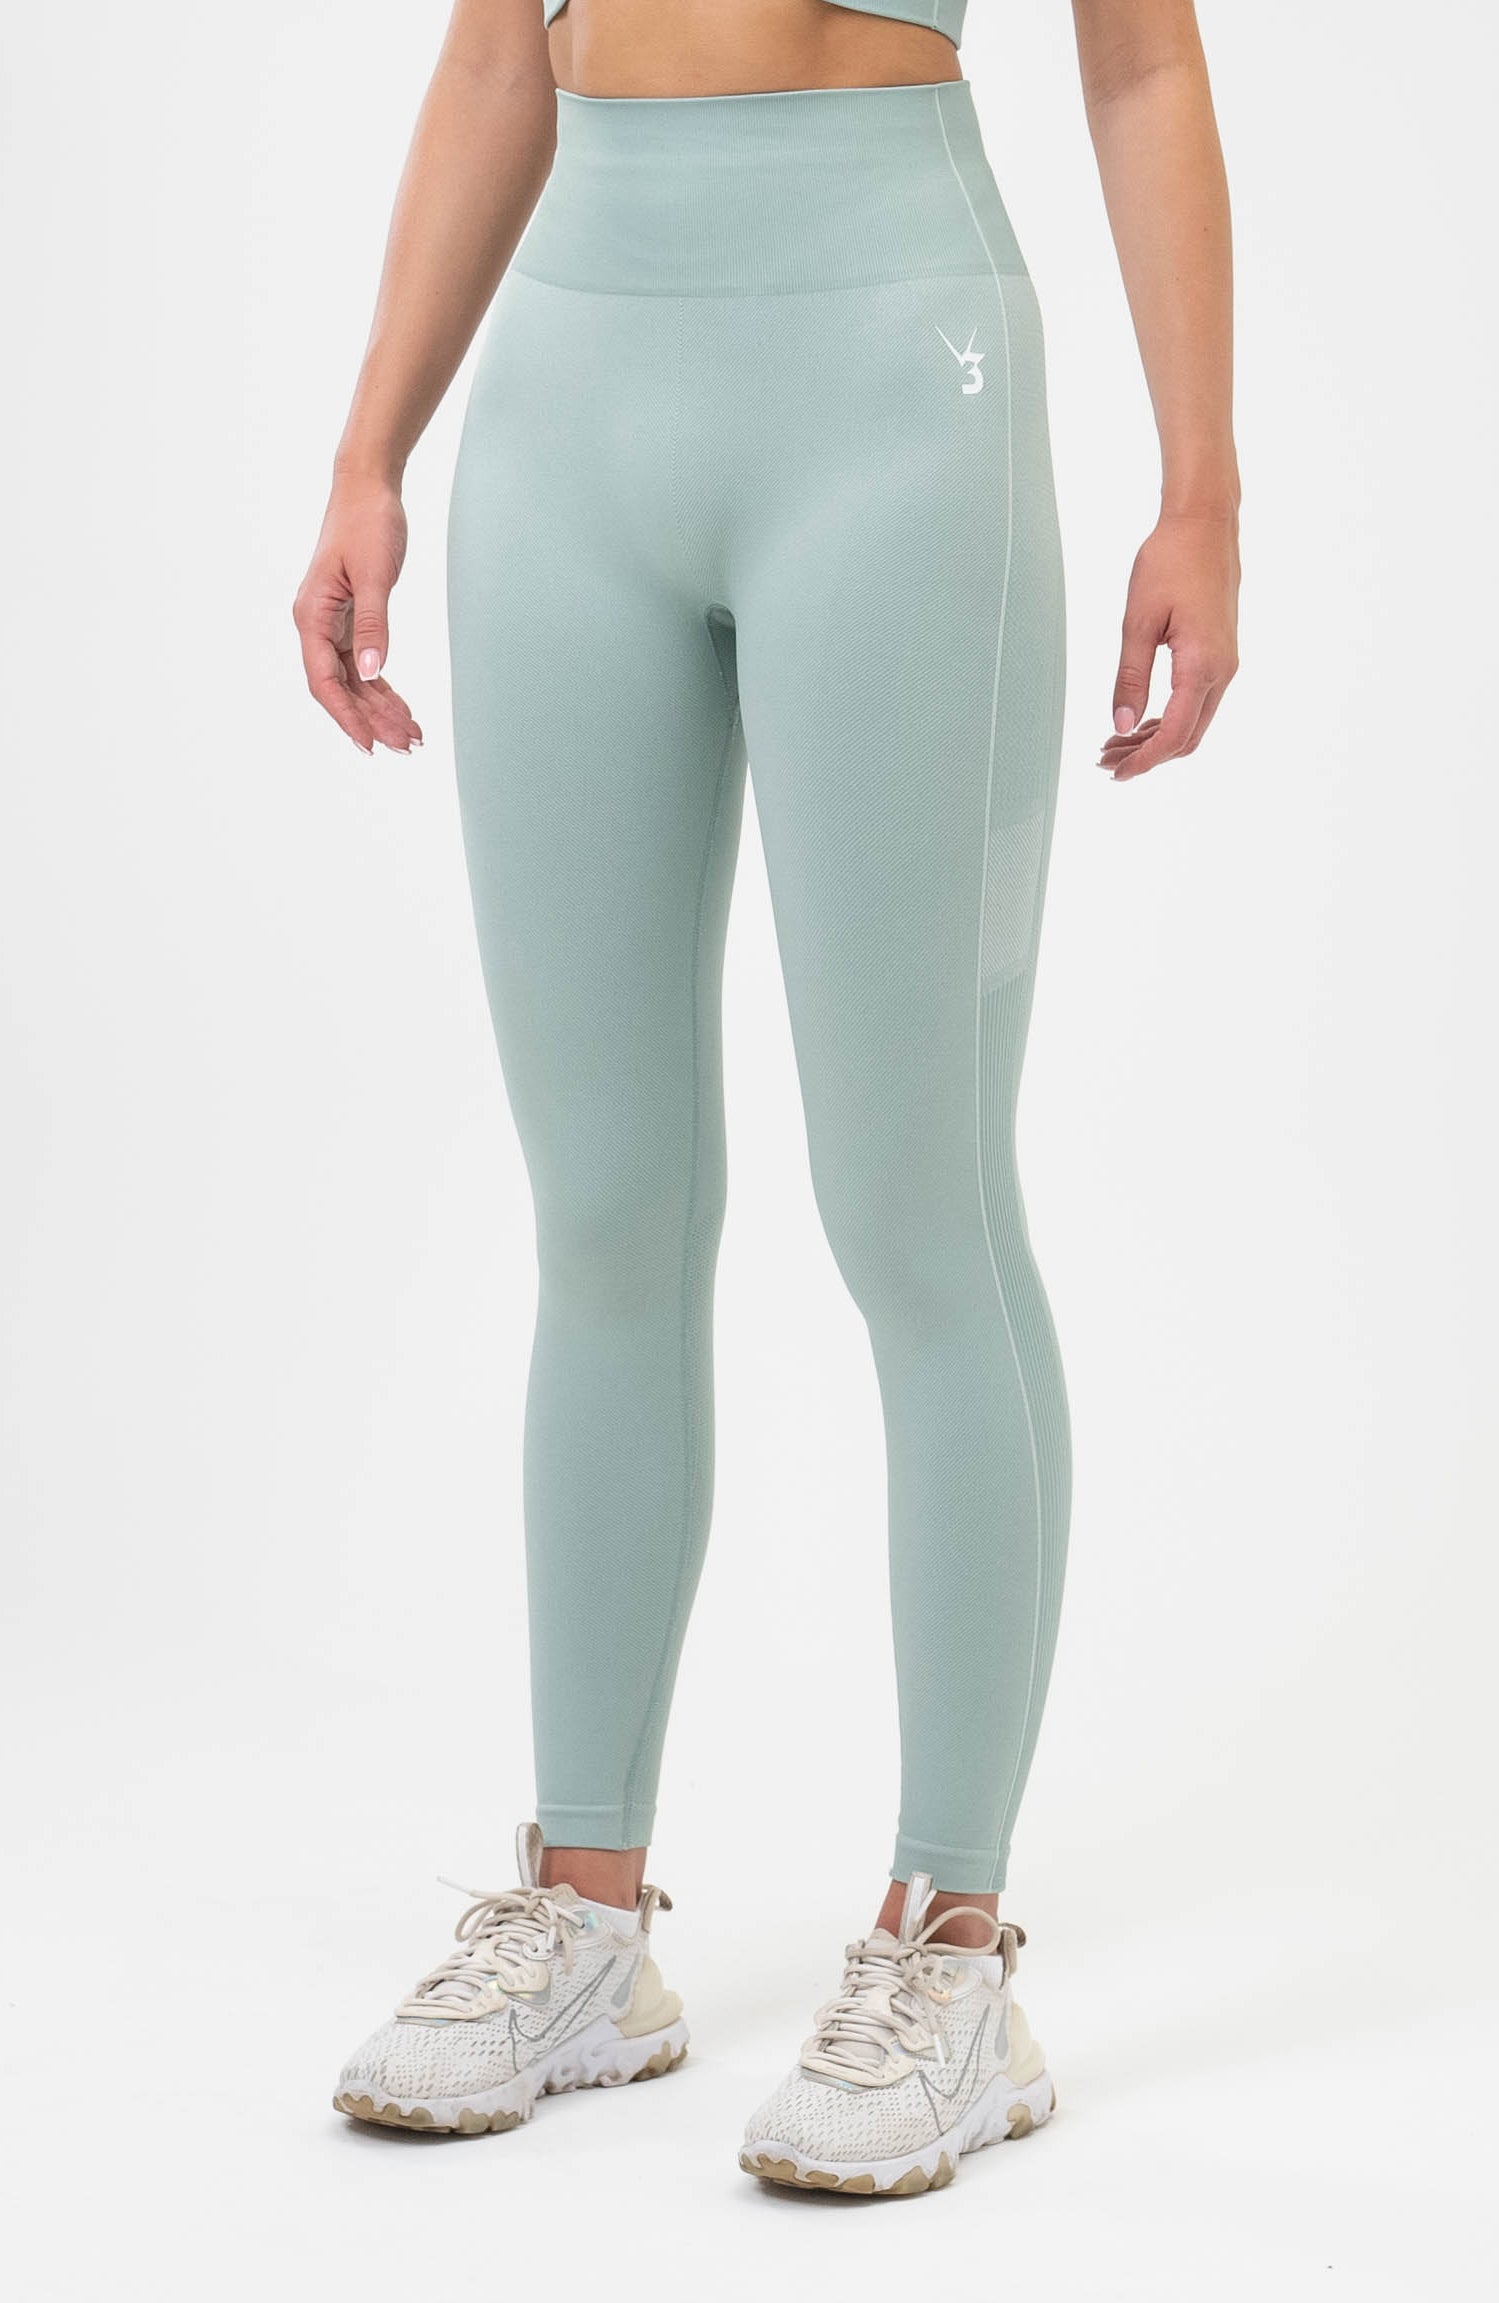 V3 Apparel Womens Seamless Unity Workout Leggings - Mint - Gym, Running,  Yoga Tights